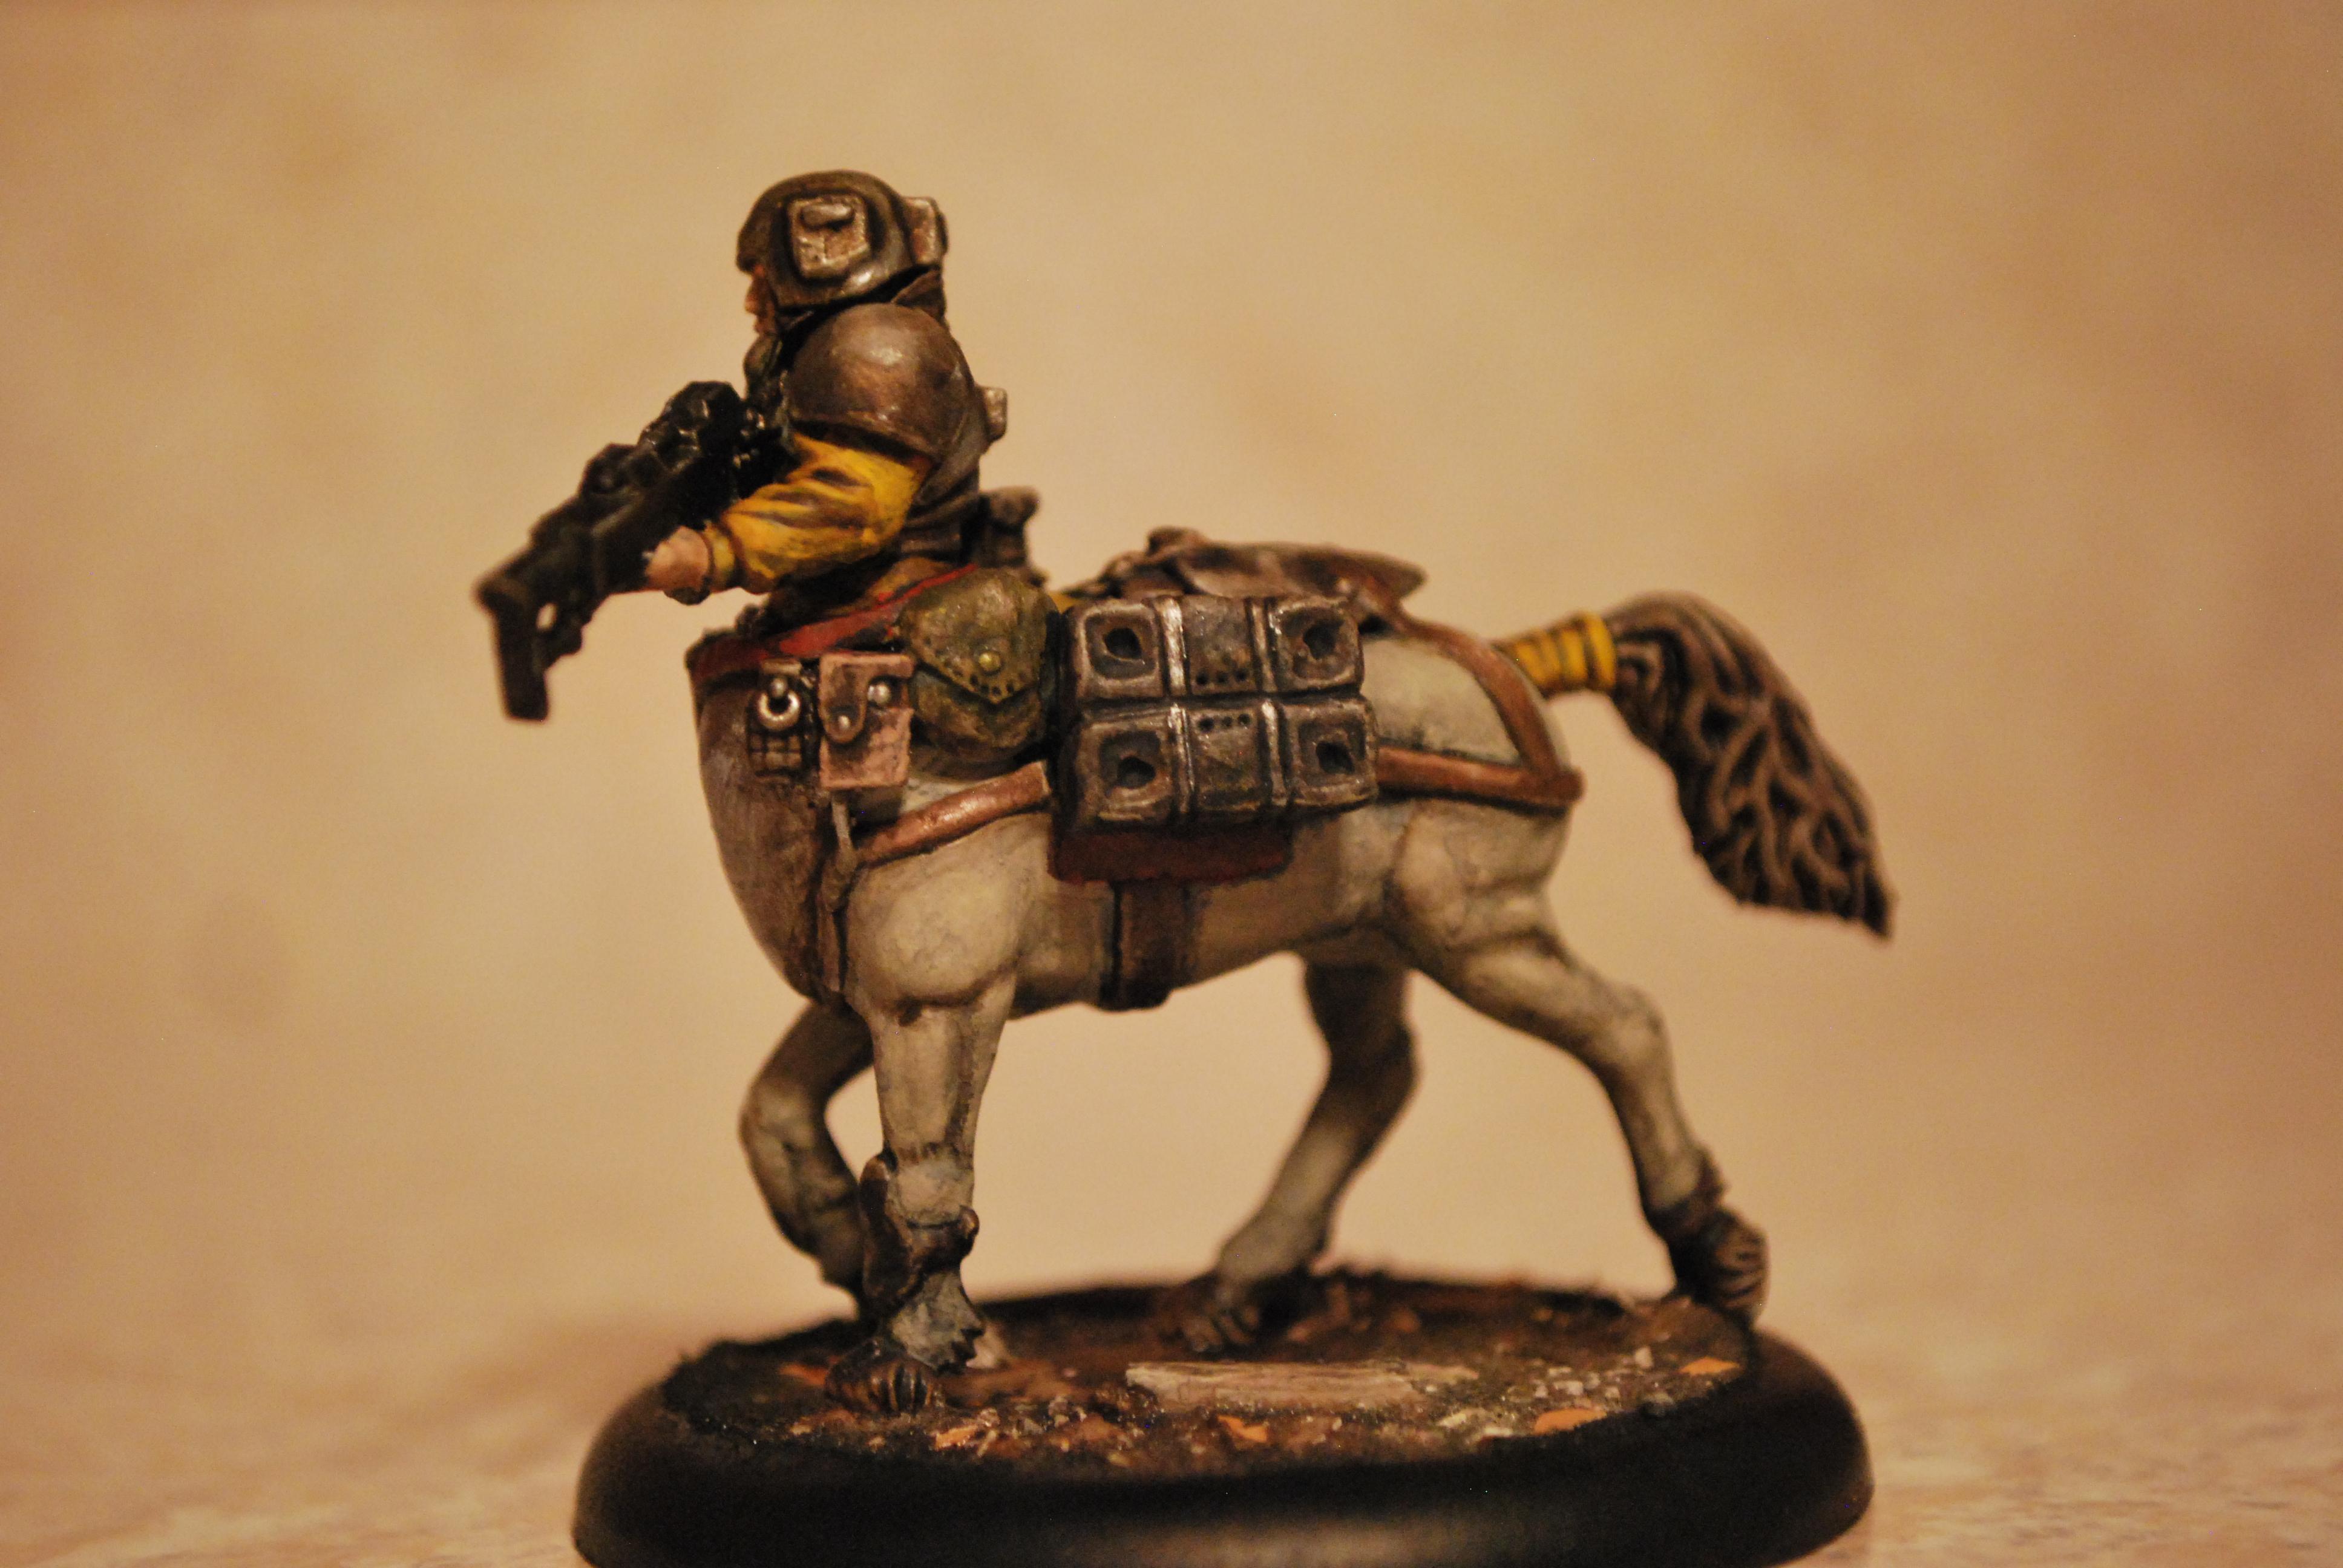 Centaur, Conversion, Custom, Empire, Fallout, Horse, Imperial Guard, Mutant, Plus, Post Apoc, Post Apocalyptic, Pro-create, Sculpting, Soldier, This Is Not A Test